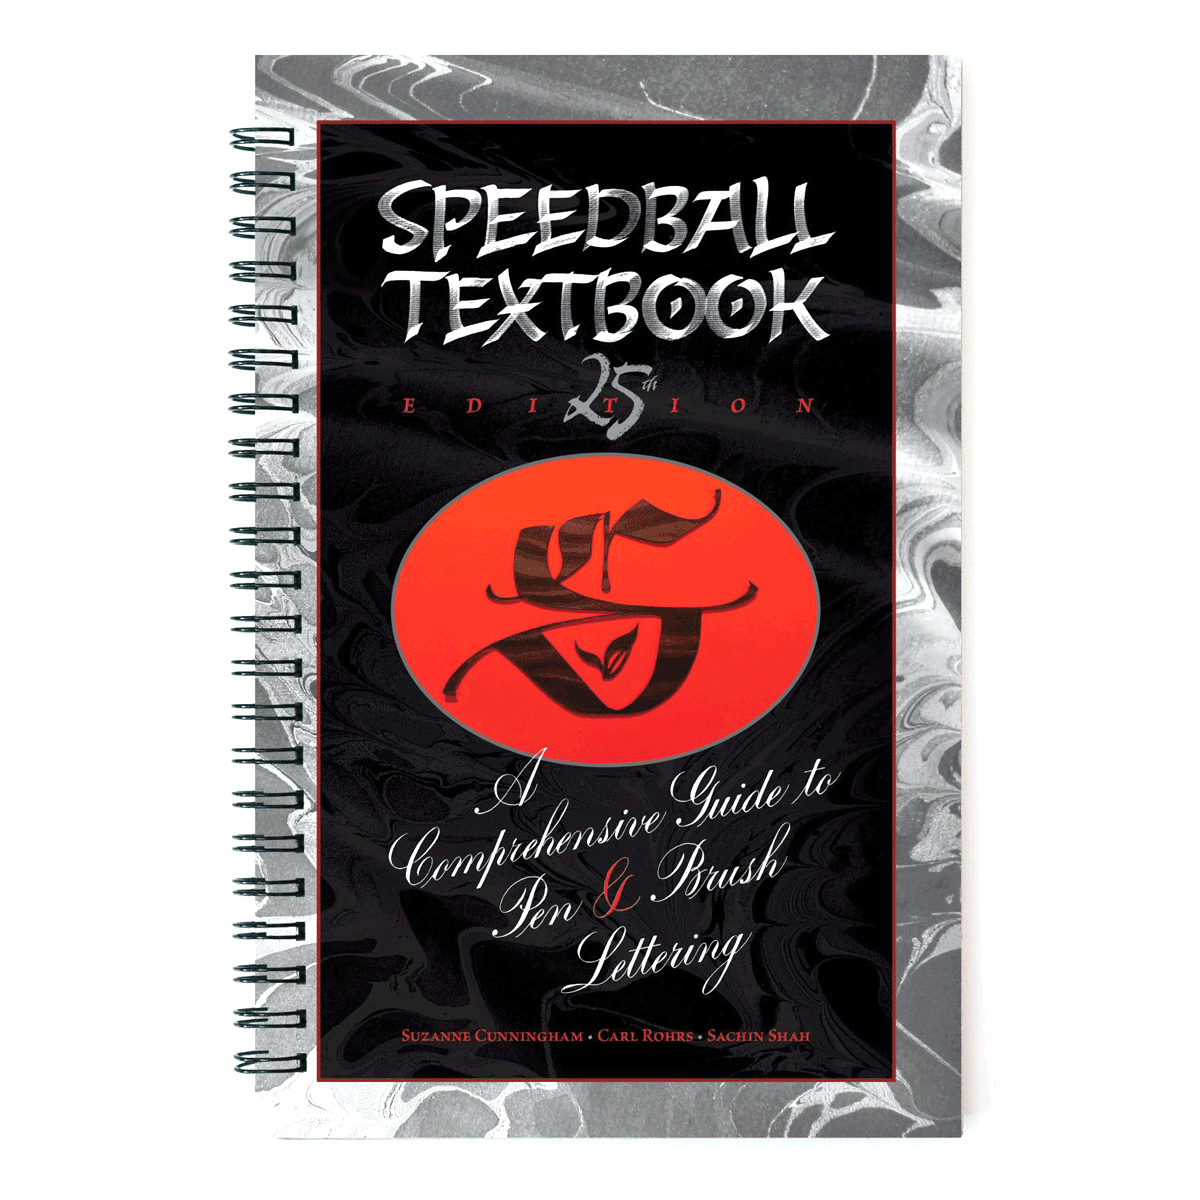 The Speedball Textbook, 25th Edition 